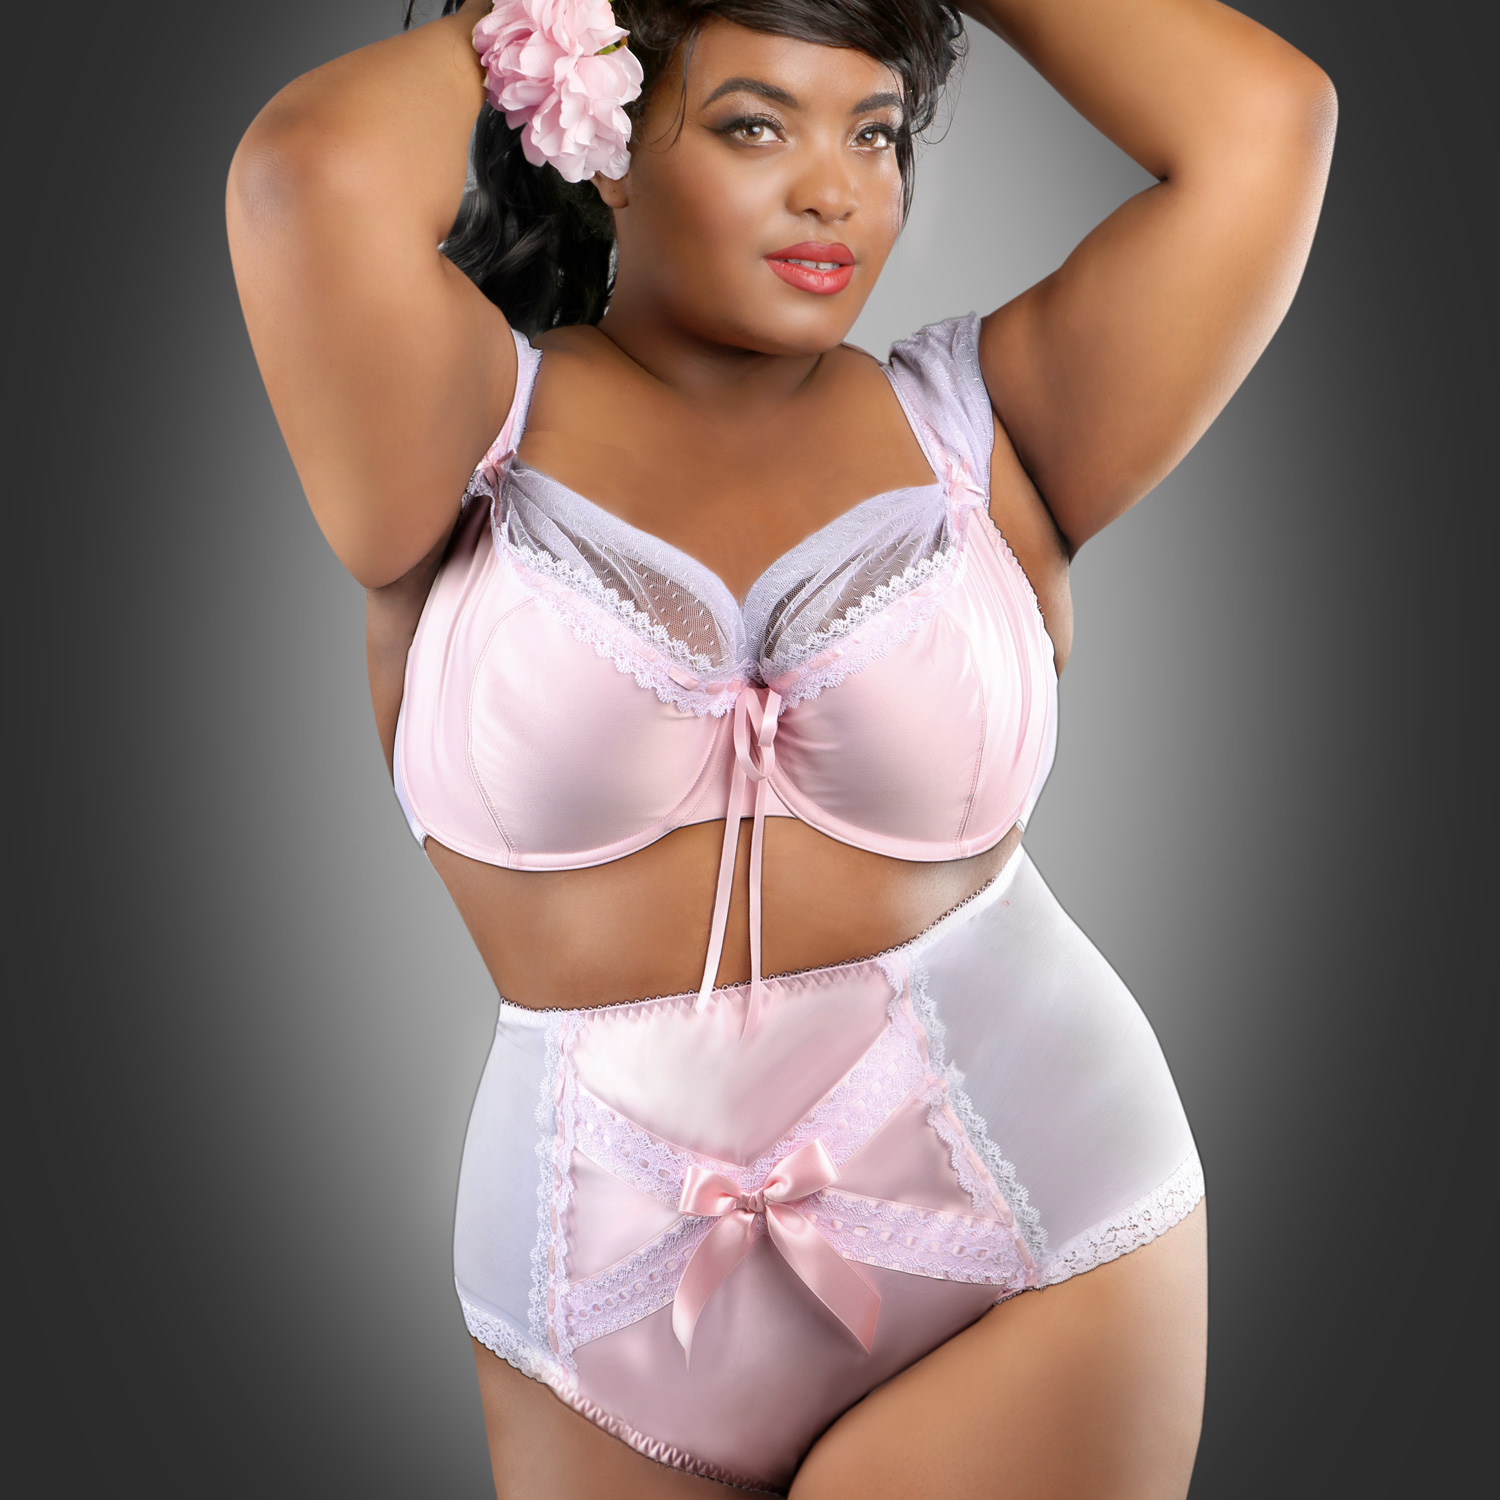 Buttress & Snatch Candy Pink Lingerie Set, made in the UK, shown on plus size model